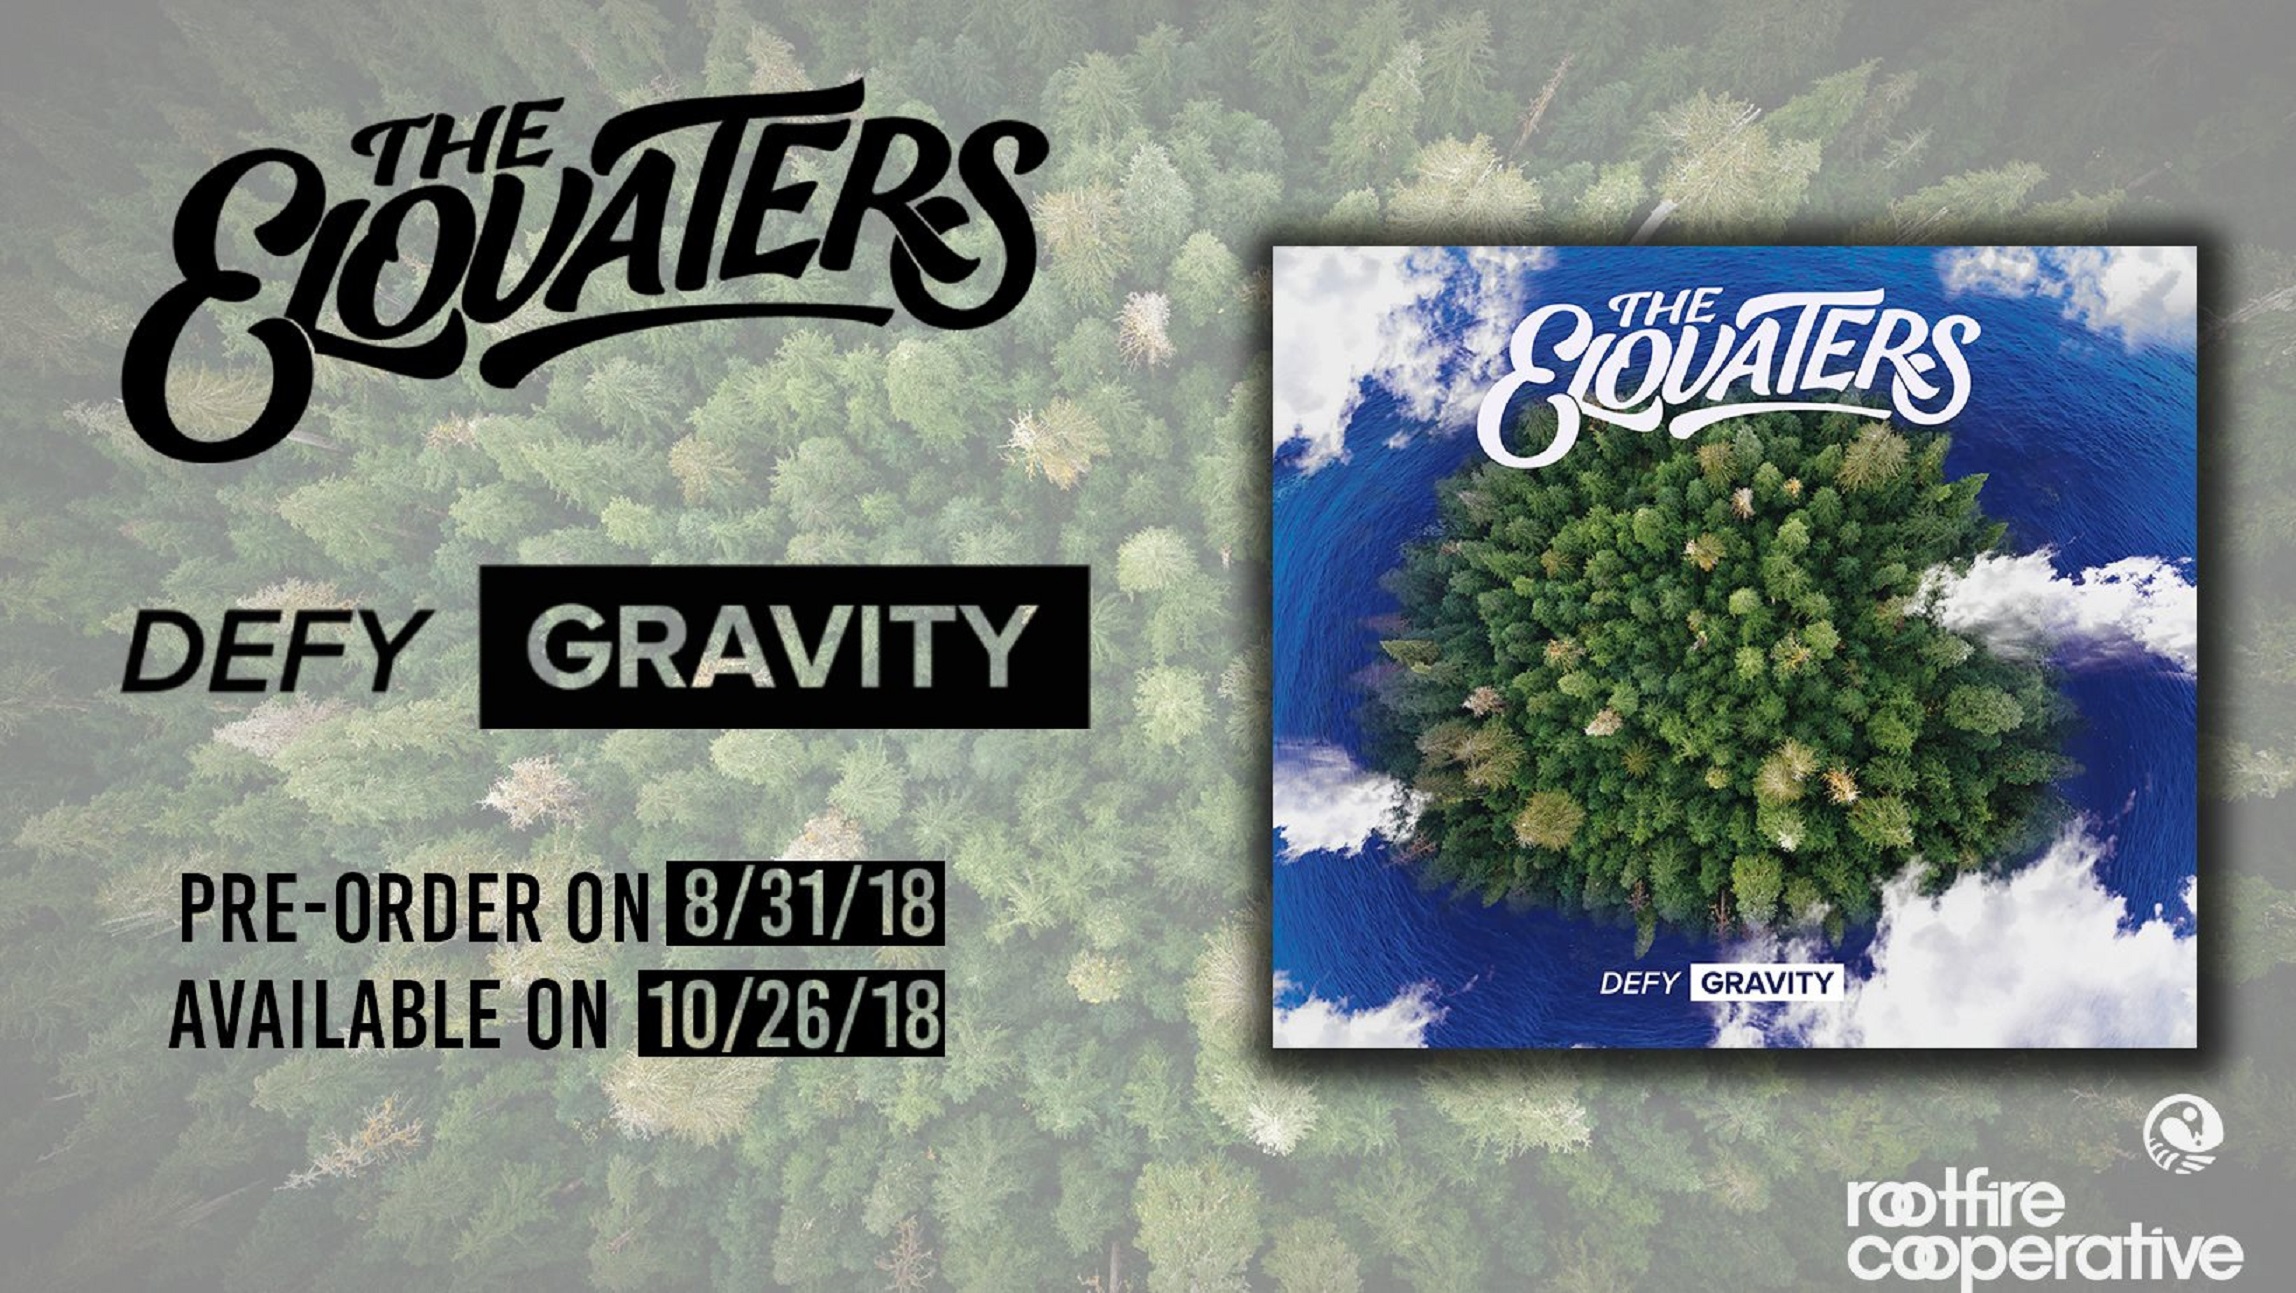 The Elovaters Announce New Album, Defy Gravity